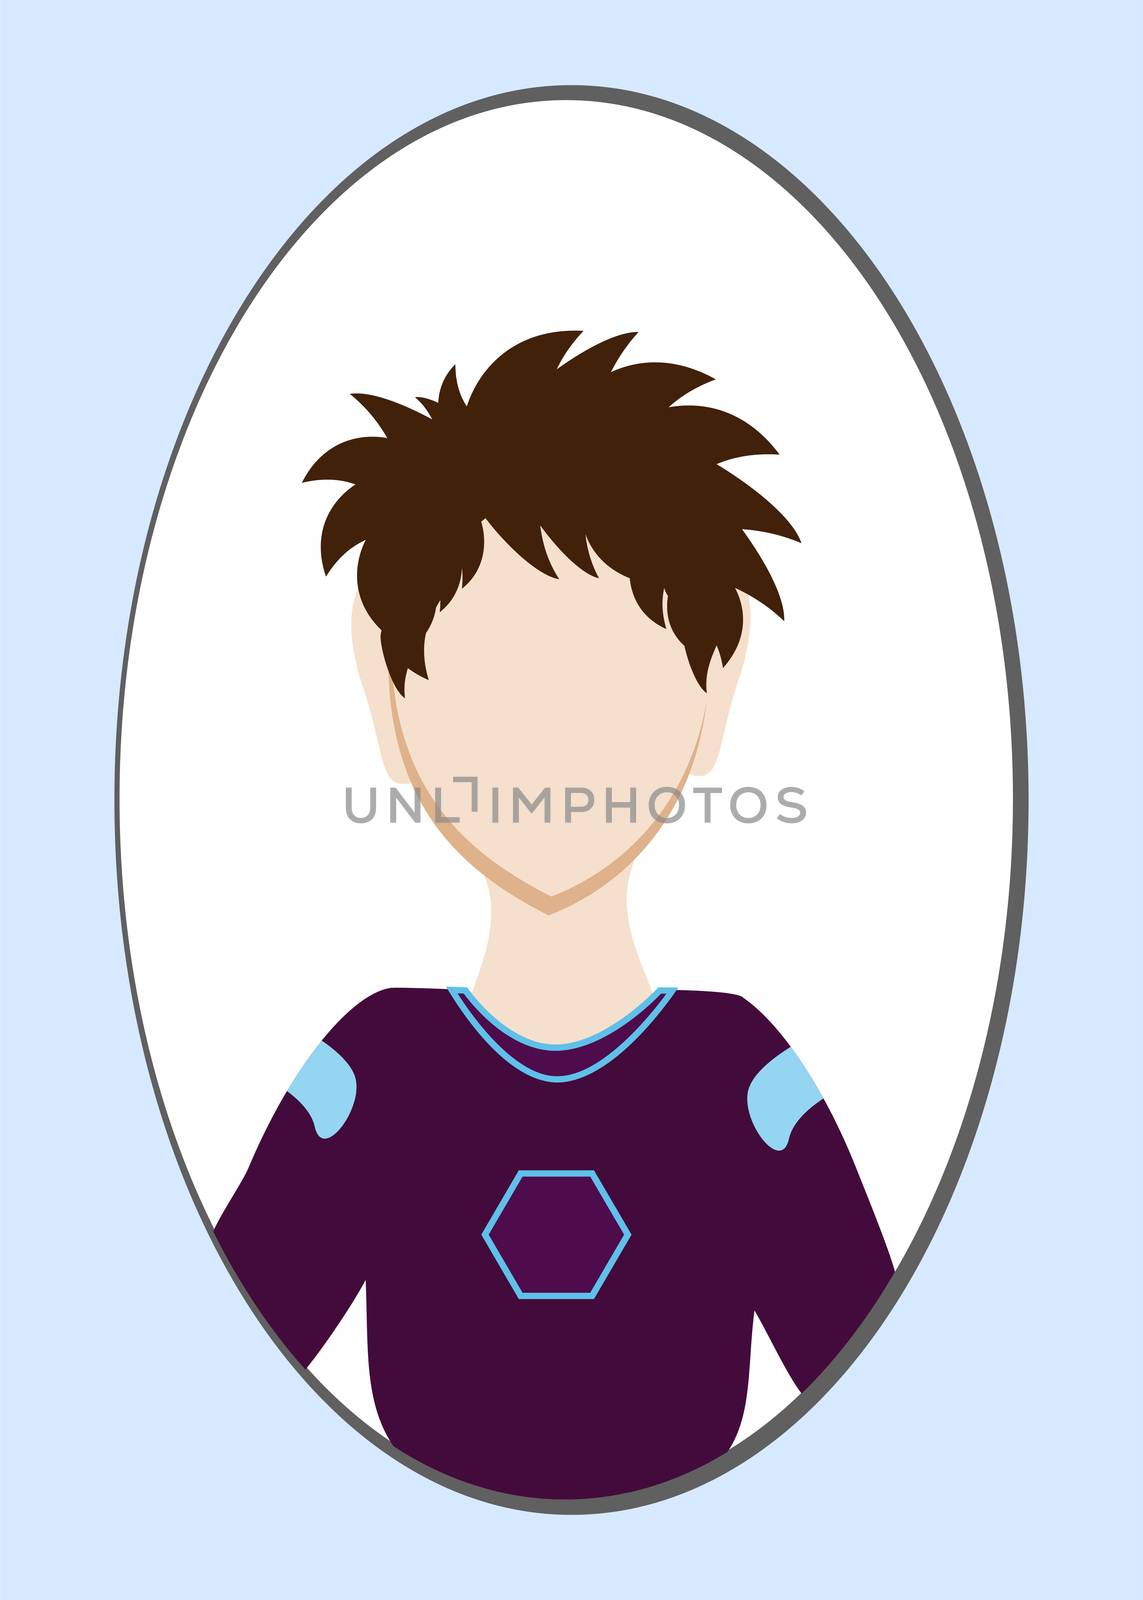 Male avatar or pictogram for social networks. Modern flat colorful style. illustration